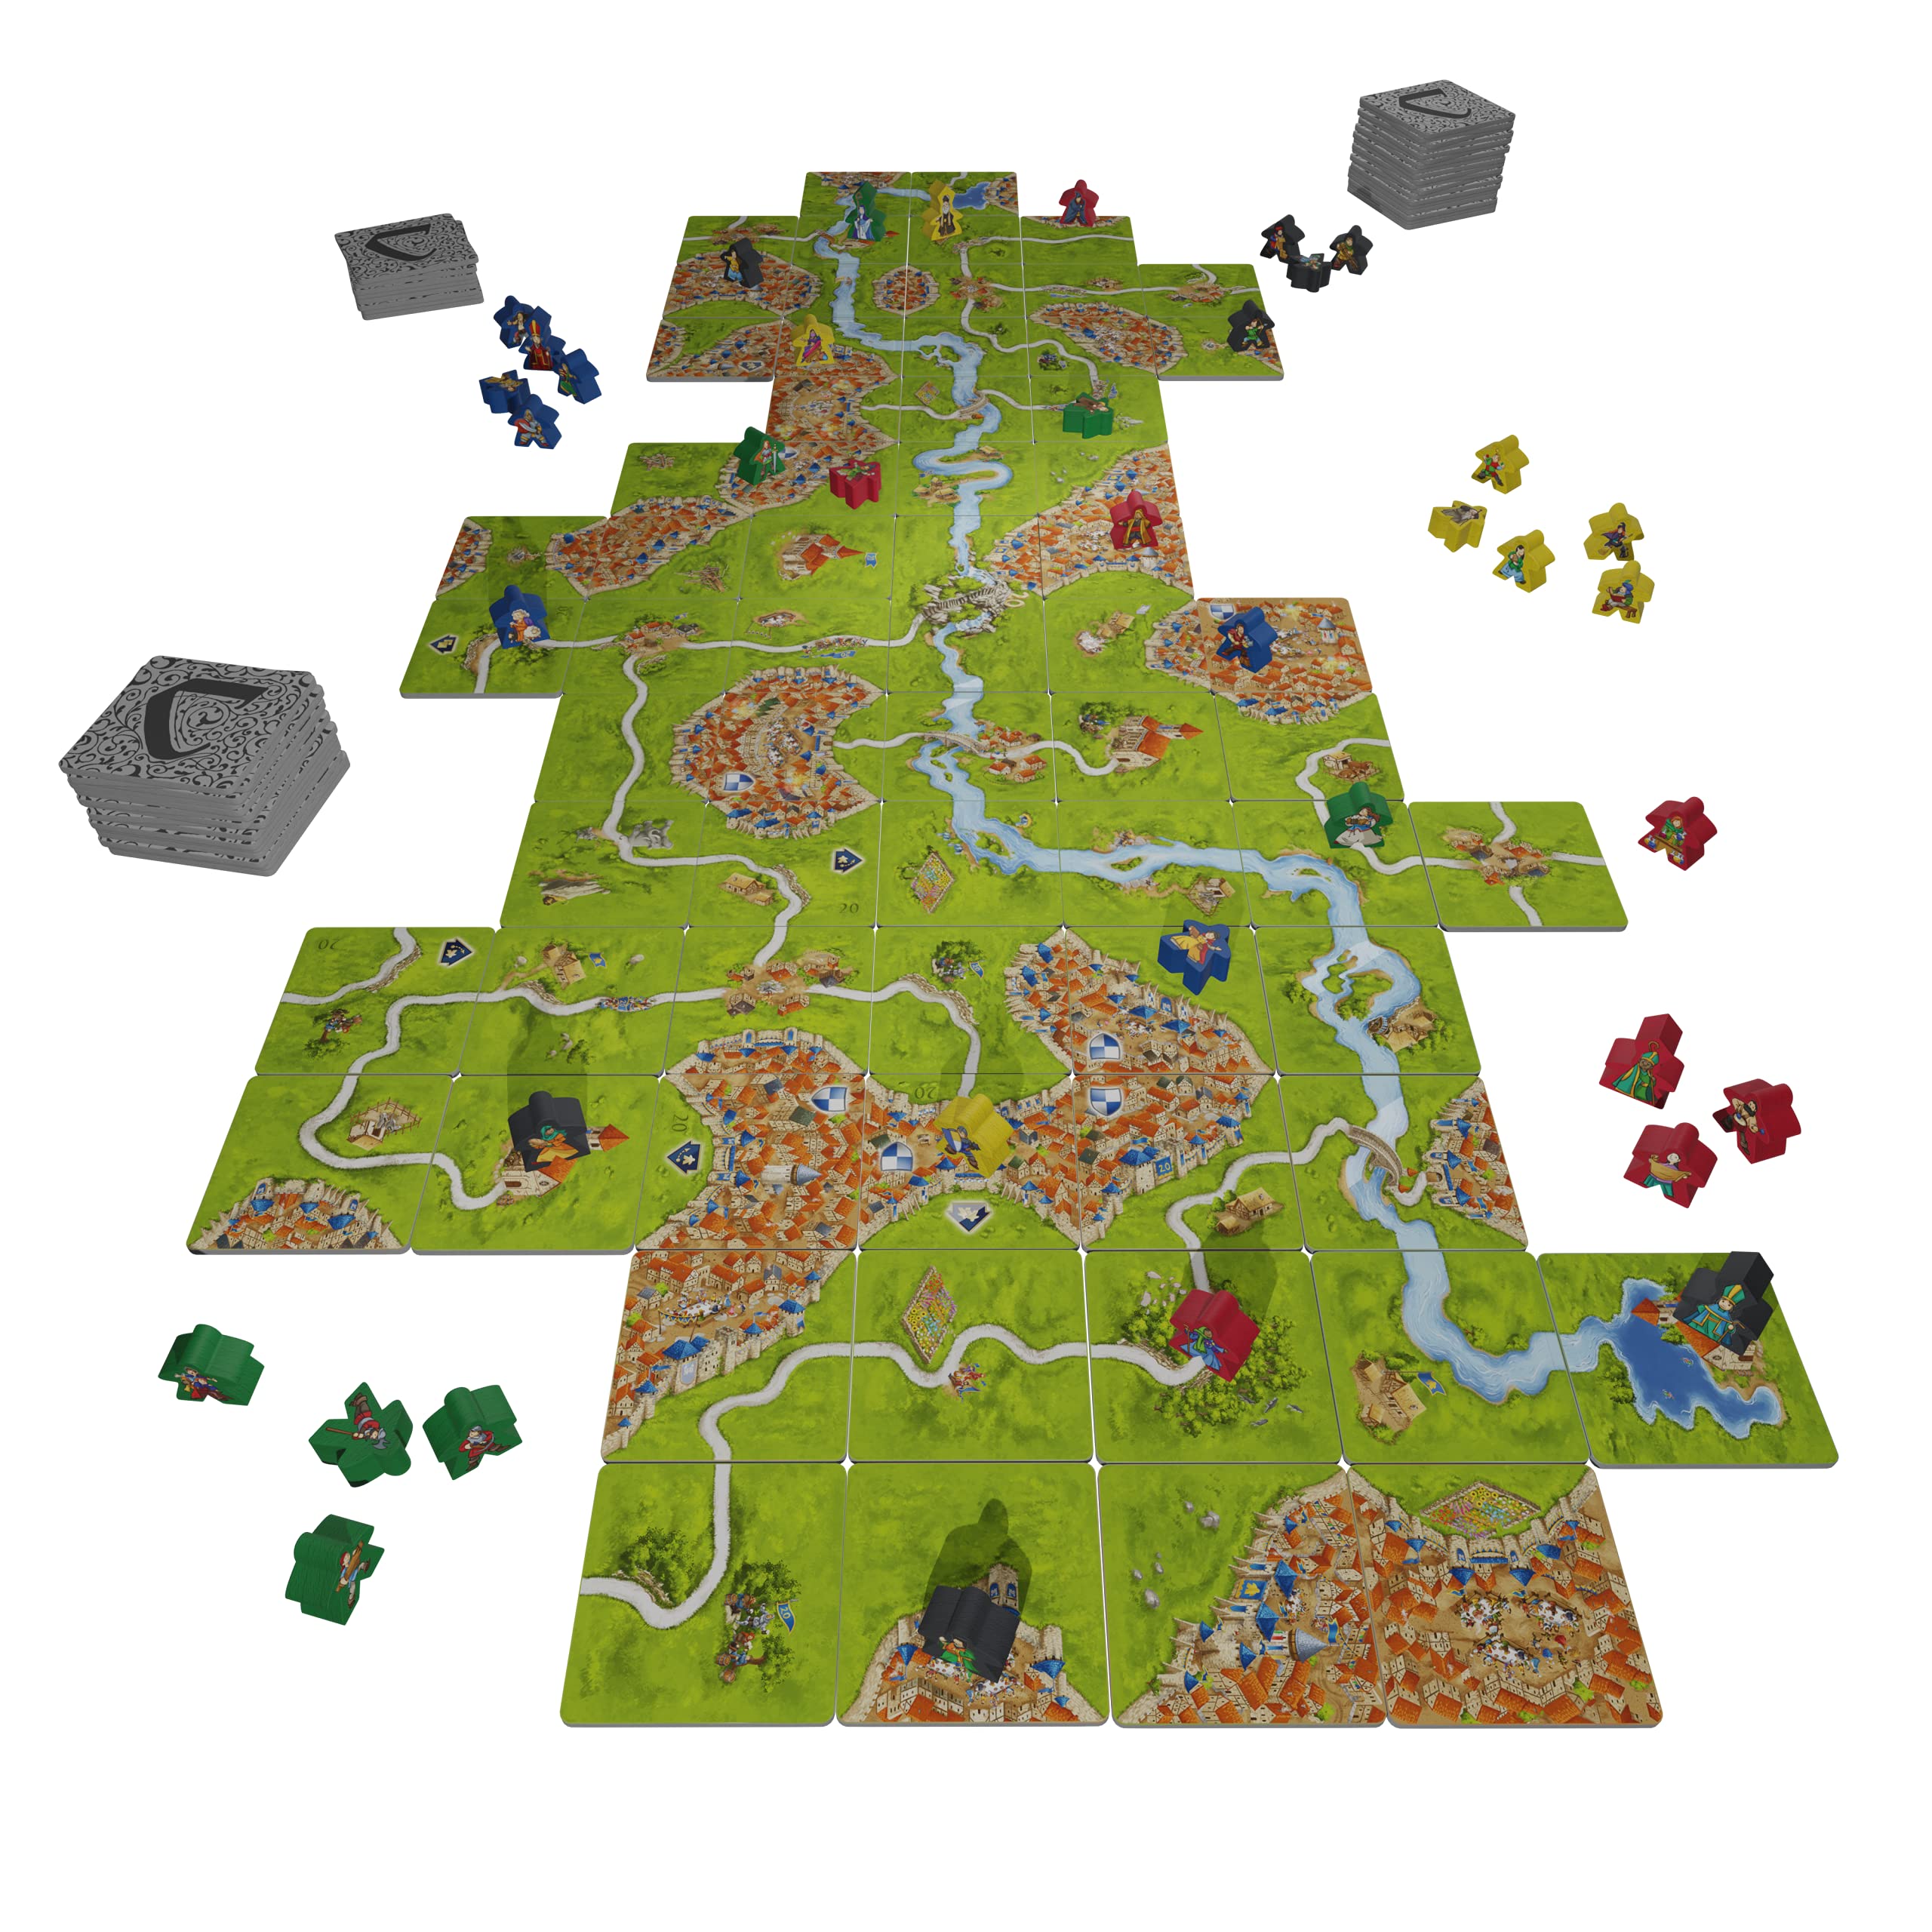 Carcassonne 20th Anniversary Edition| Family Board Game for Adults and Kids | Strategy /Adventure Game | Ages 7+ | 2-5 Players | Avg. Playtime 30-45 Minutes | Made by Z-Man Games